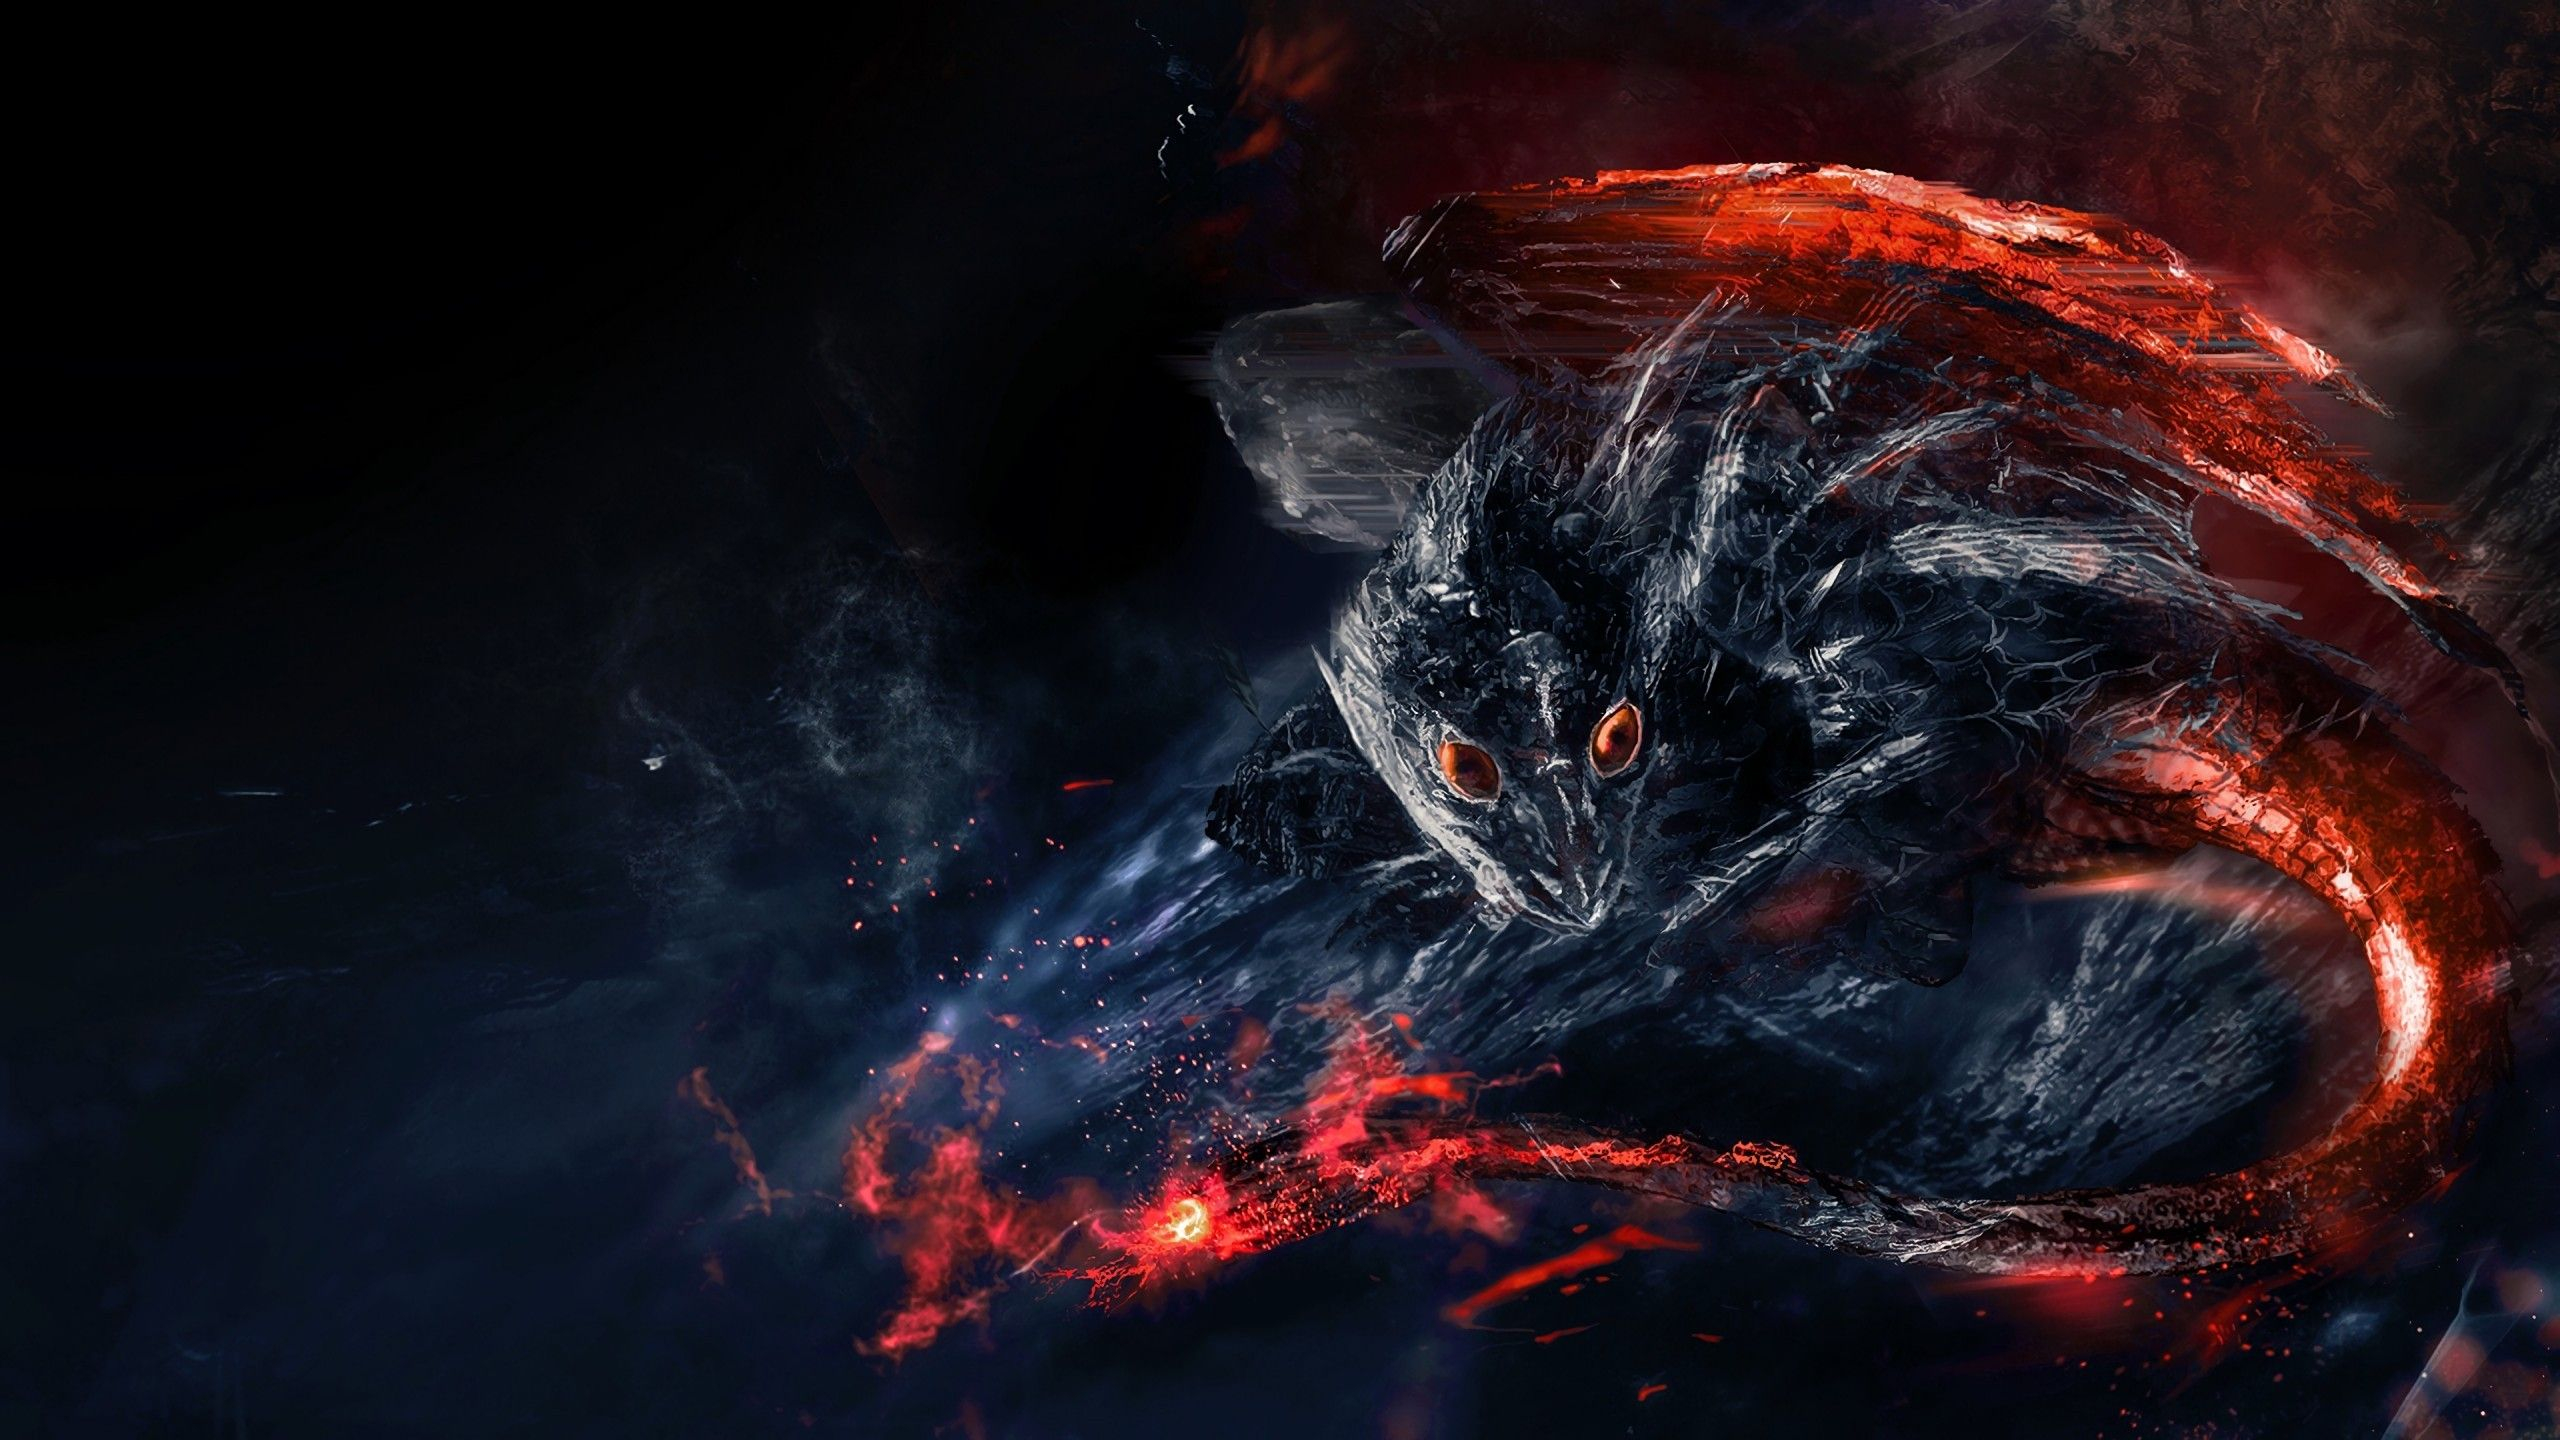 2560x1440 Red Dragon 2560X1440 Wallpapers Top Free Red Dragon 2560X1440 Backgrounds